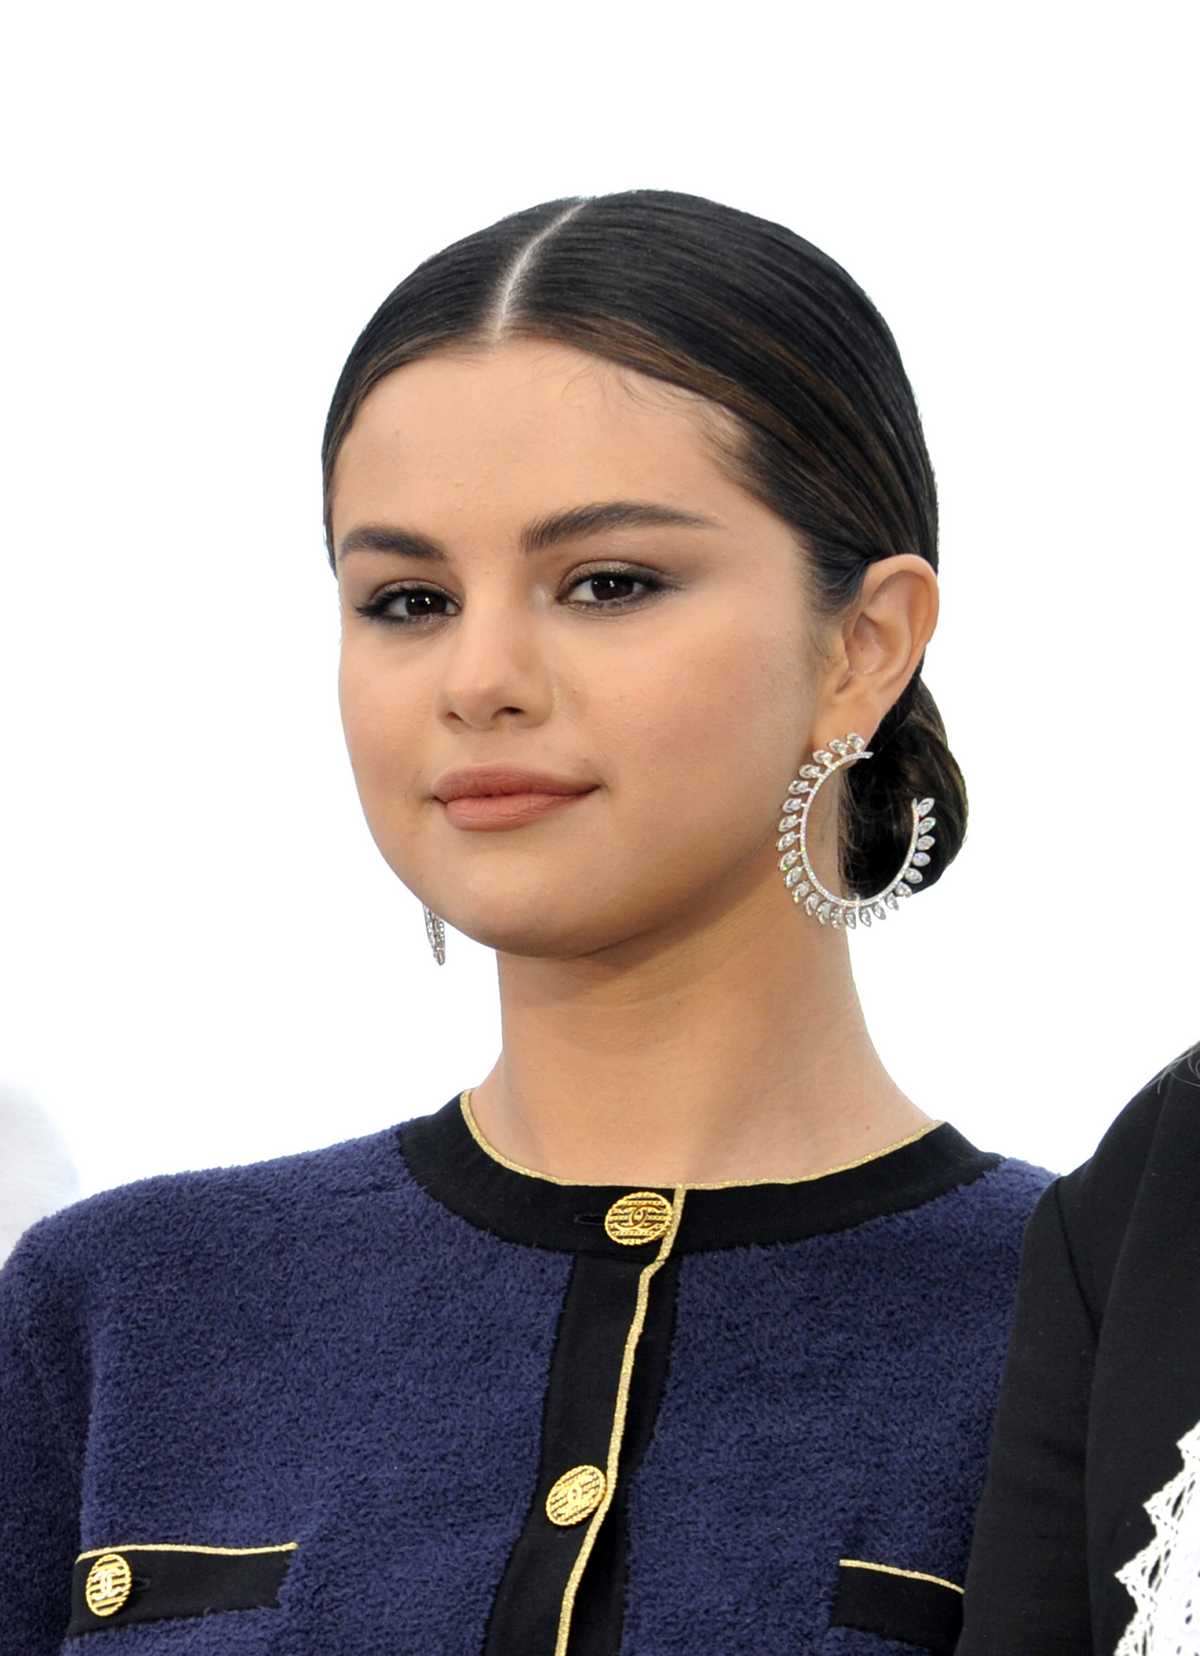 Selena_Gomez_-_At_The_The_Dead_Don_t_Die_Photocall_In_Cannes2C_France__05152019-28.jpg